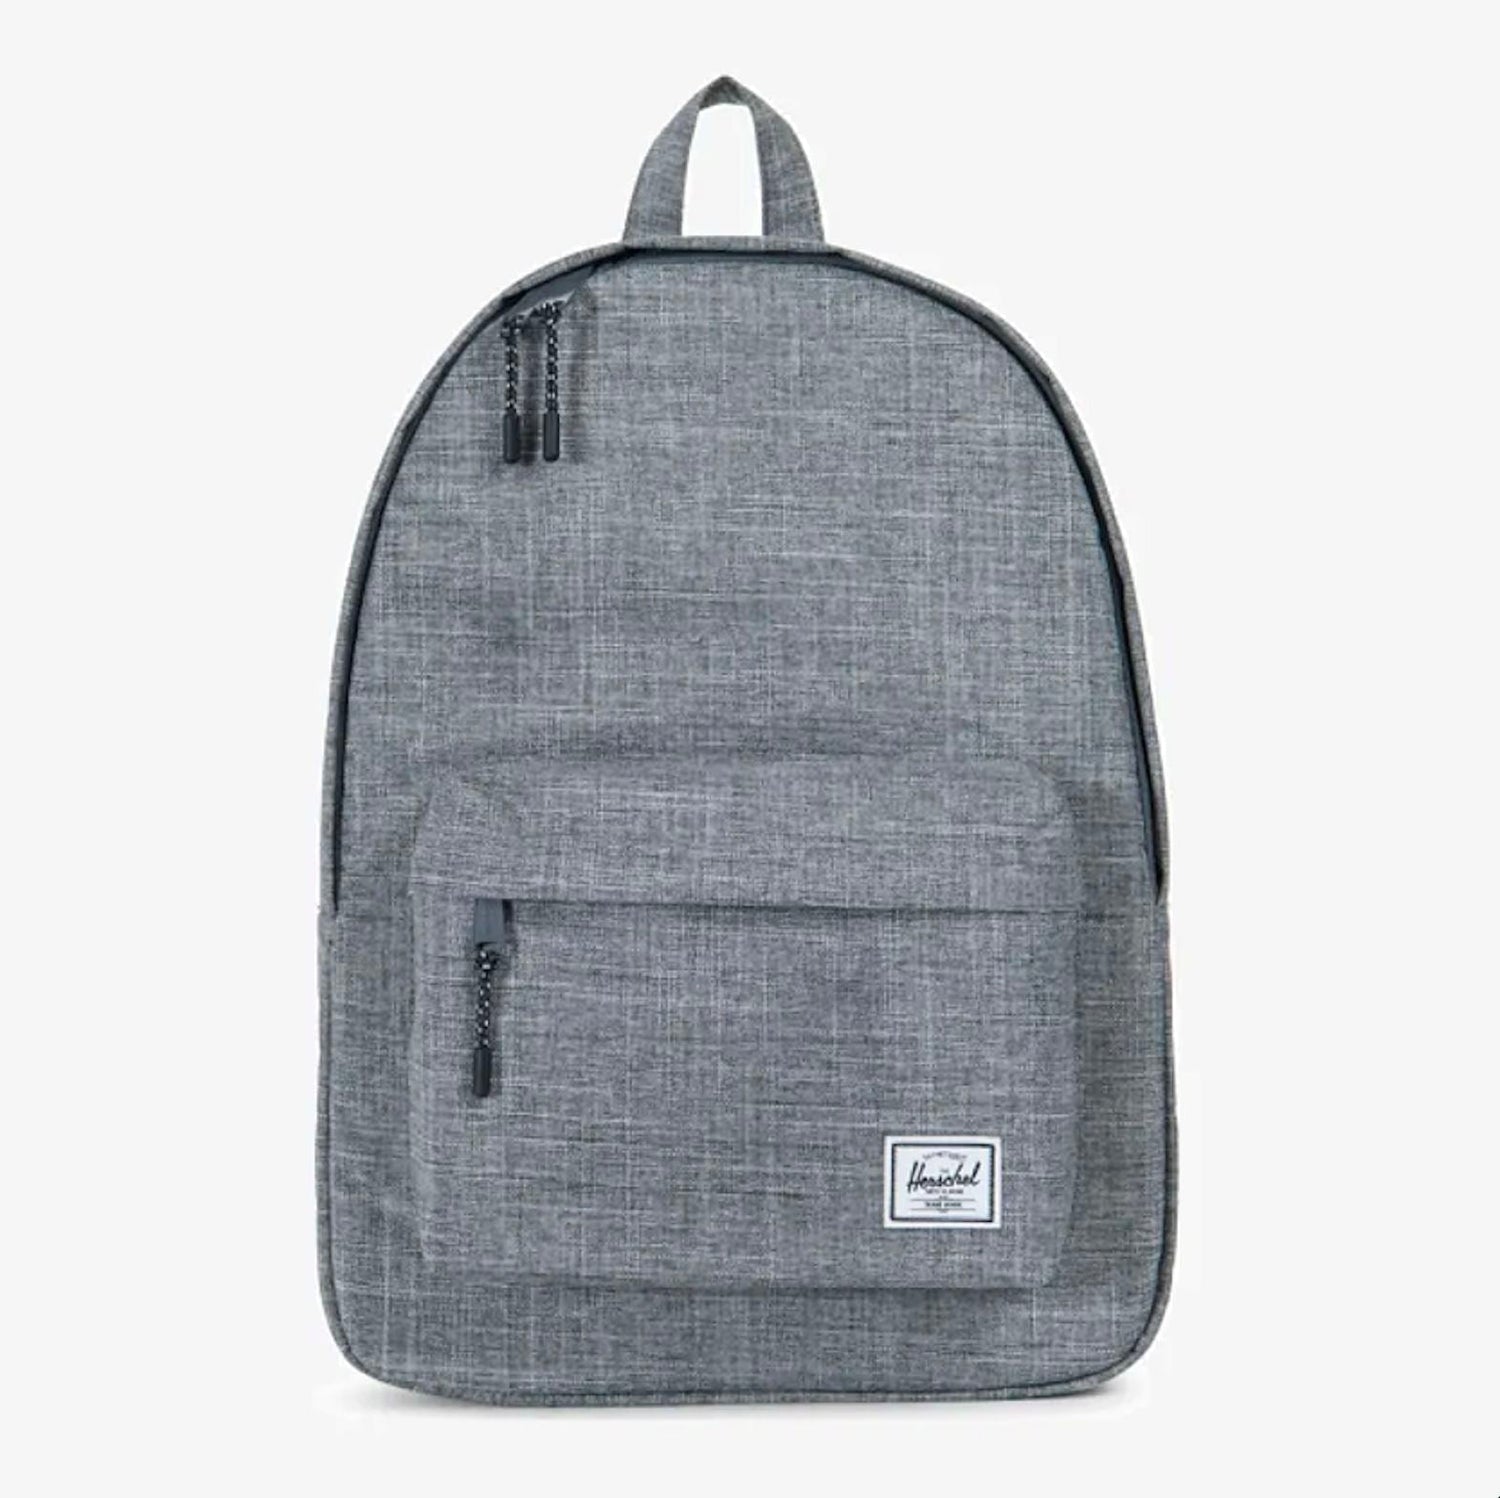 Herschel Classic Backpack Charcoal Multi Color 